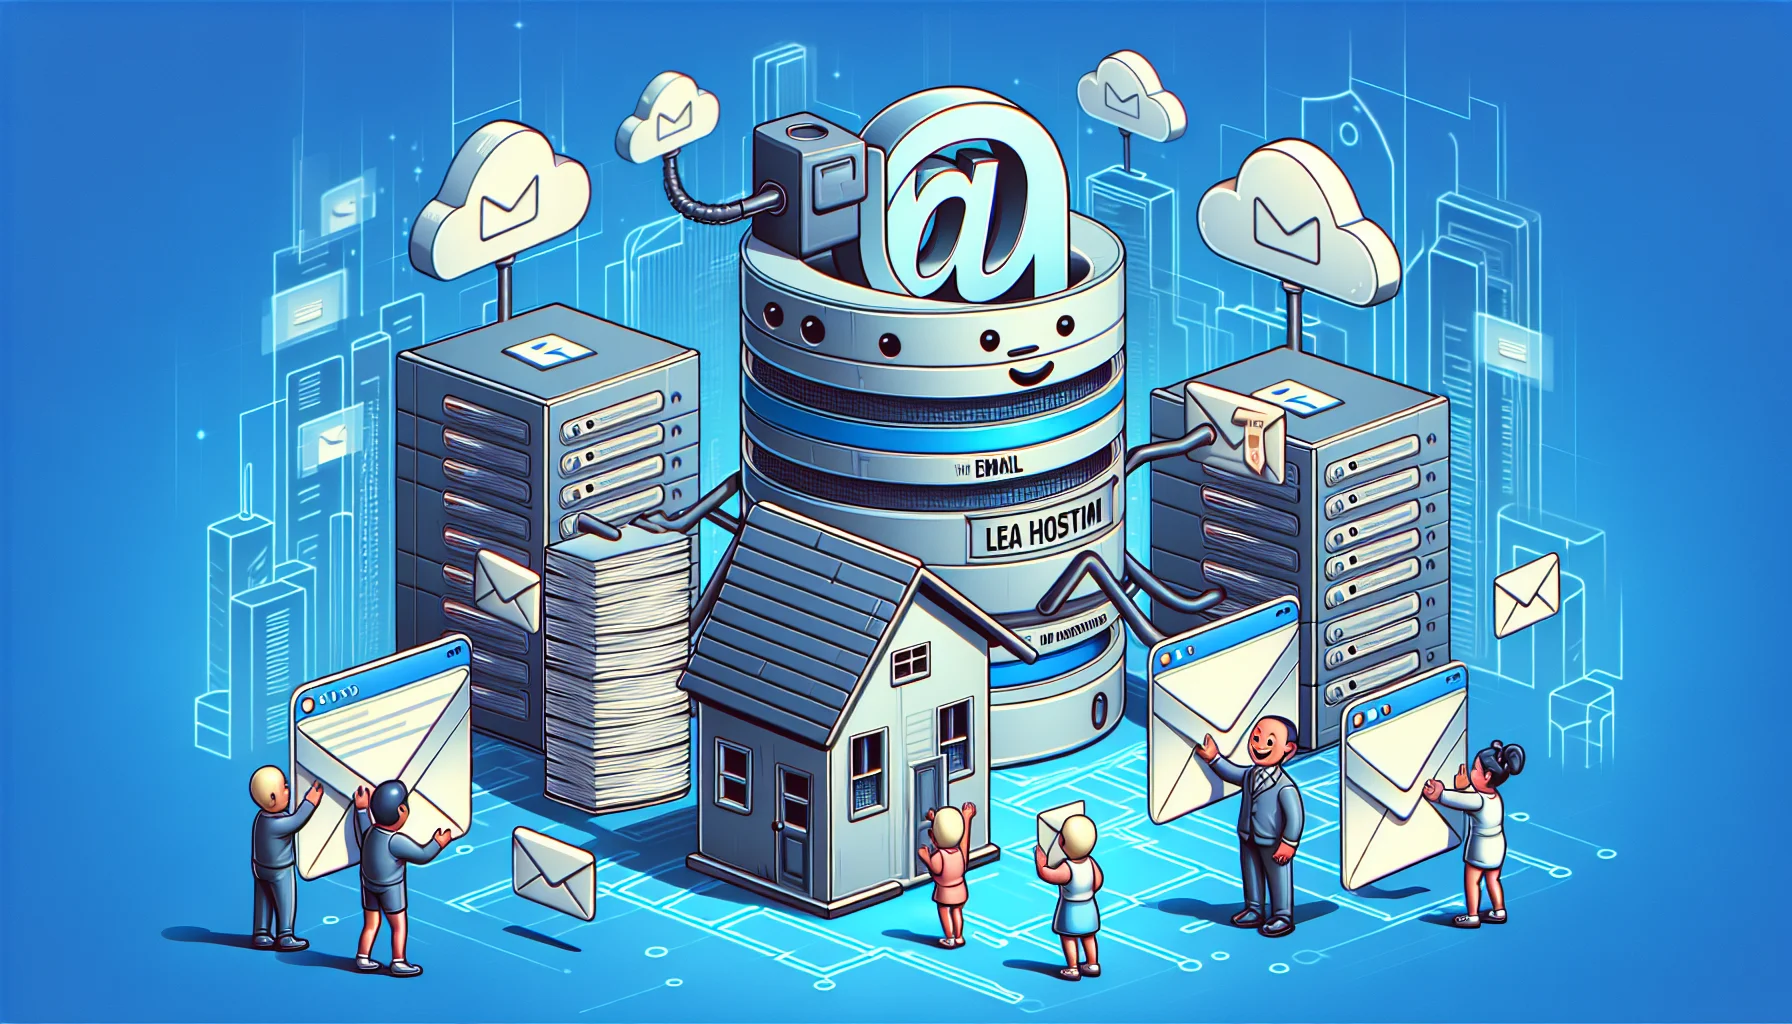 Create a detailed illustration of a comical situation meant to highlight budget-friendly email hosting. Showcase a small, abstract representation of an email, depicted as a tiny house with an 'at' symbol on it, cheerfully welcoming incoming messages depicted as letters. Nearby, web hosting is represented by a larger house, also anthropomorphized and happily interacting with a group of document icons, demonstrating file sharing. Emphasize an atmosphere of friendly collaboration and efficient service, all set against a backdrop of futuristic cityscape to symbolize the digital realm.